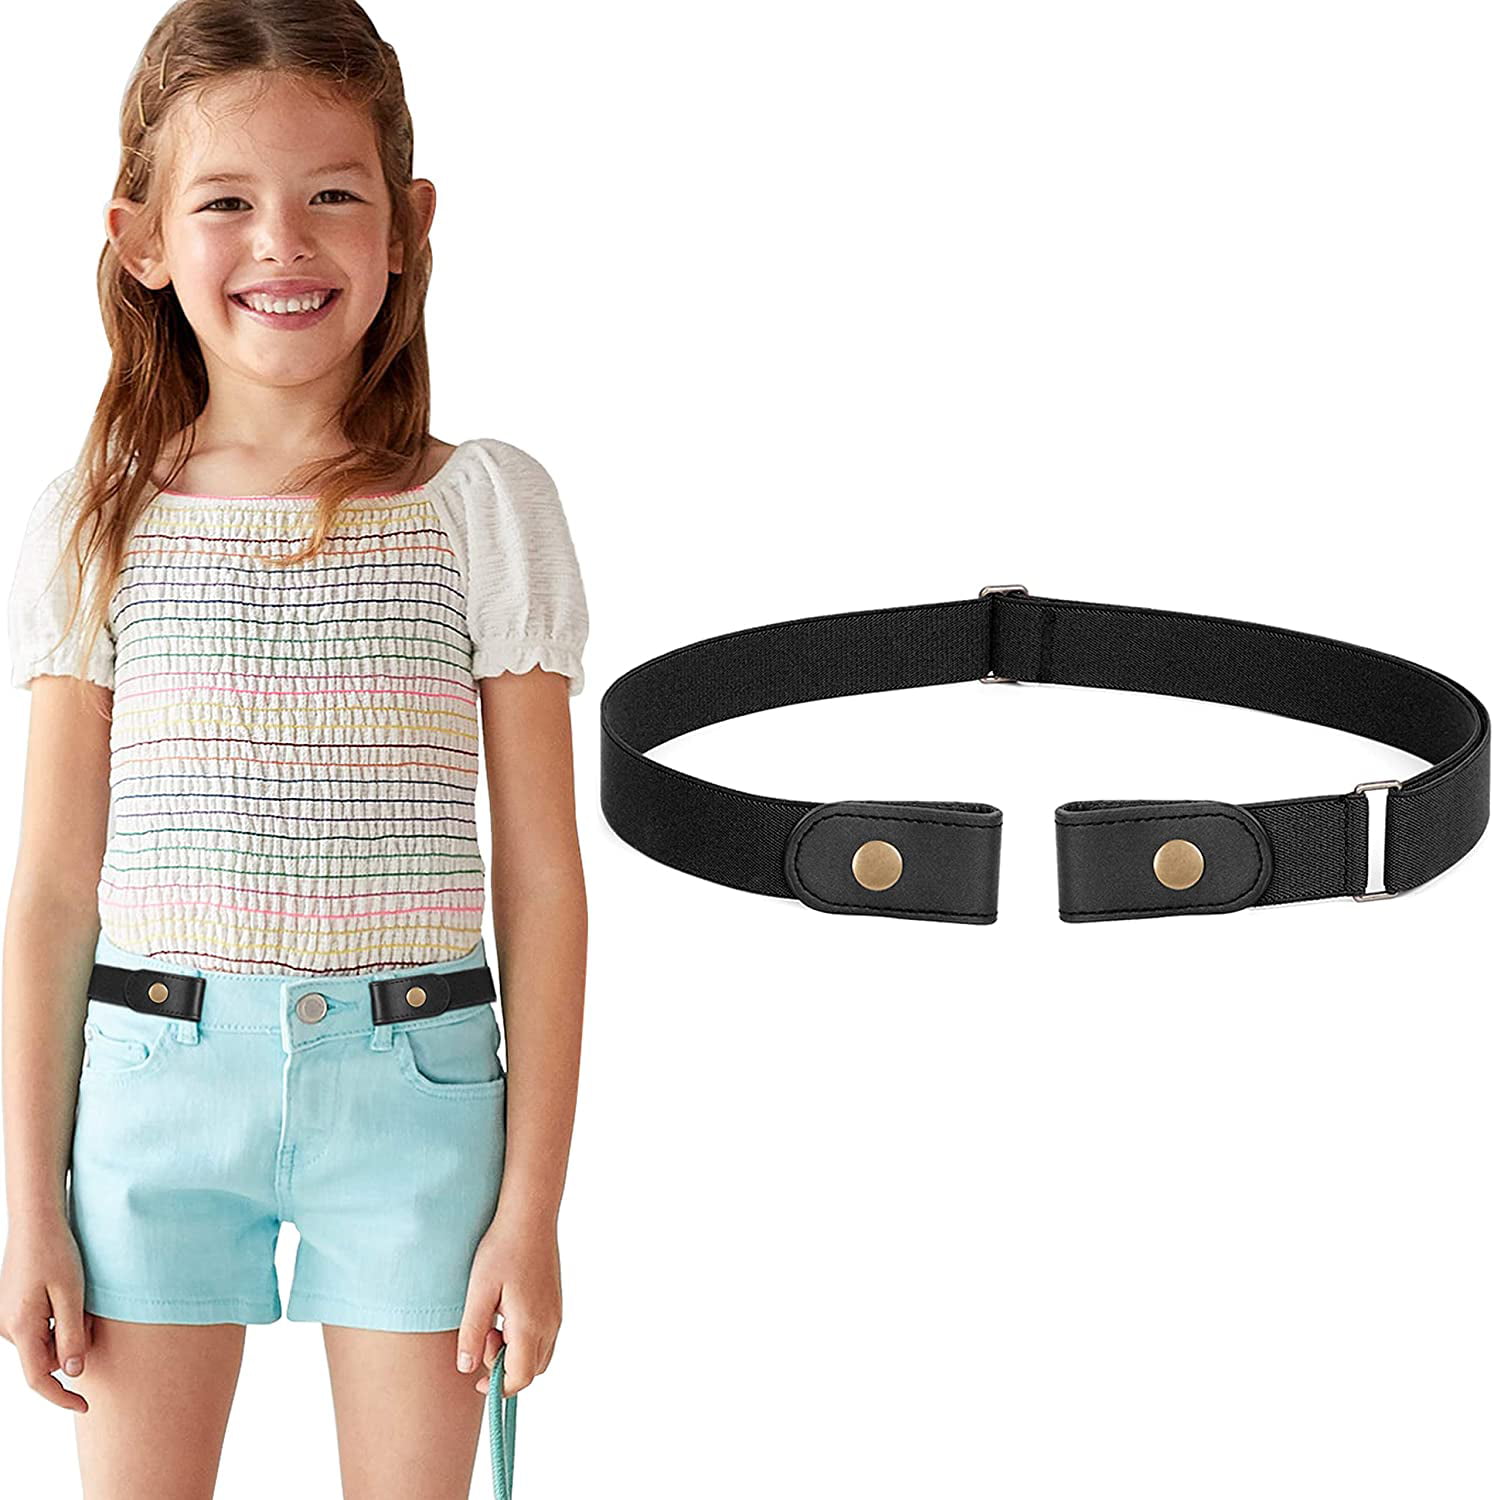 SNAP TO   BELTS FOR  KIDS  RED   SIZE  22 TO 27  INCH   WAIST 